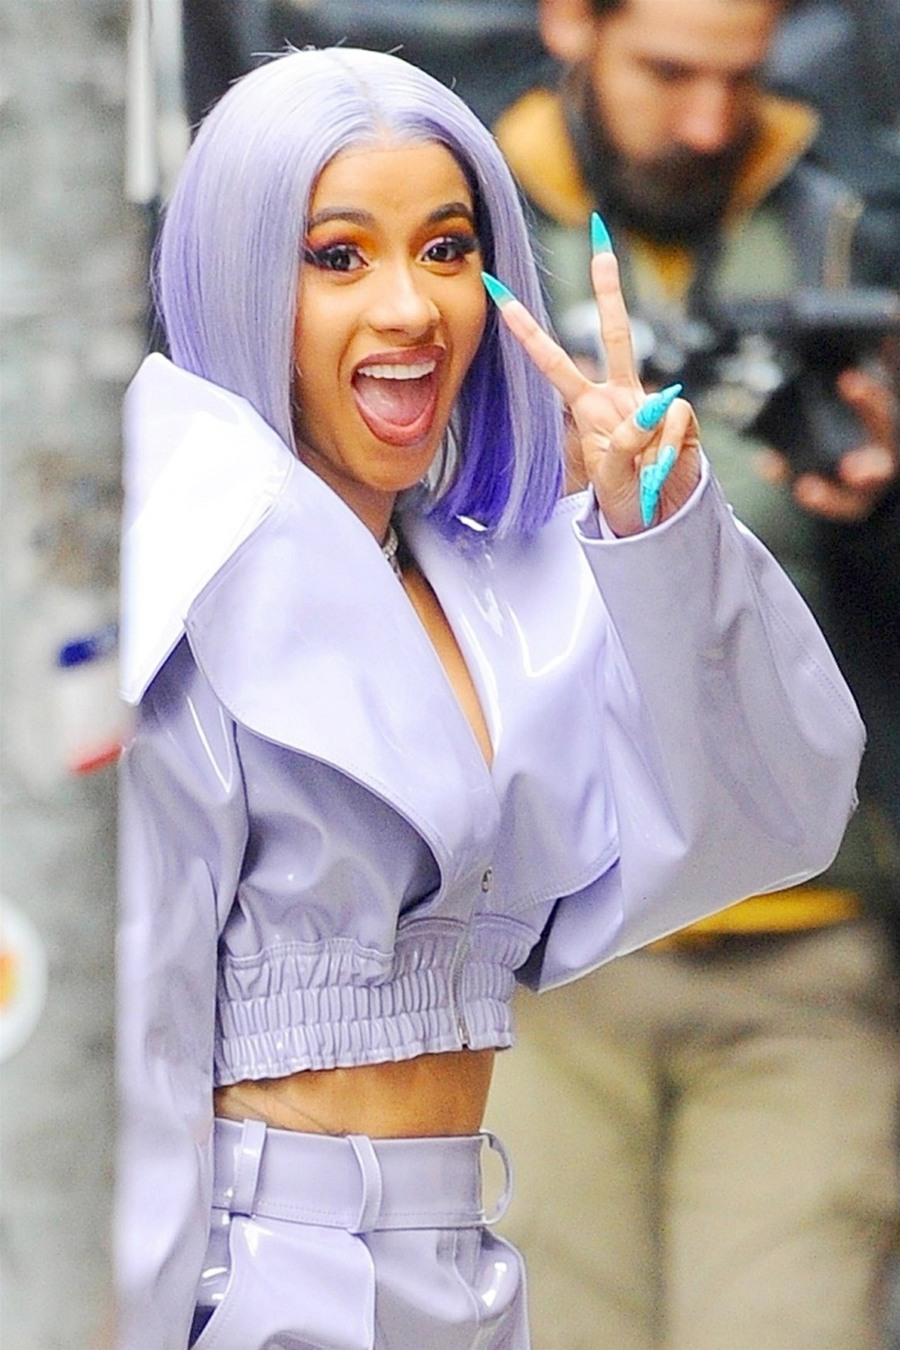 Cardi B heads out to run errands in a wild purple outfit